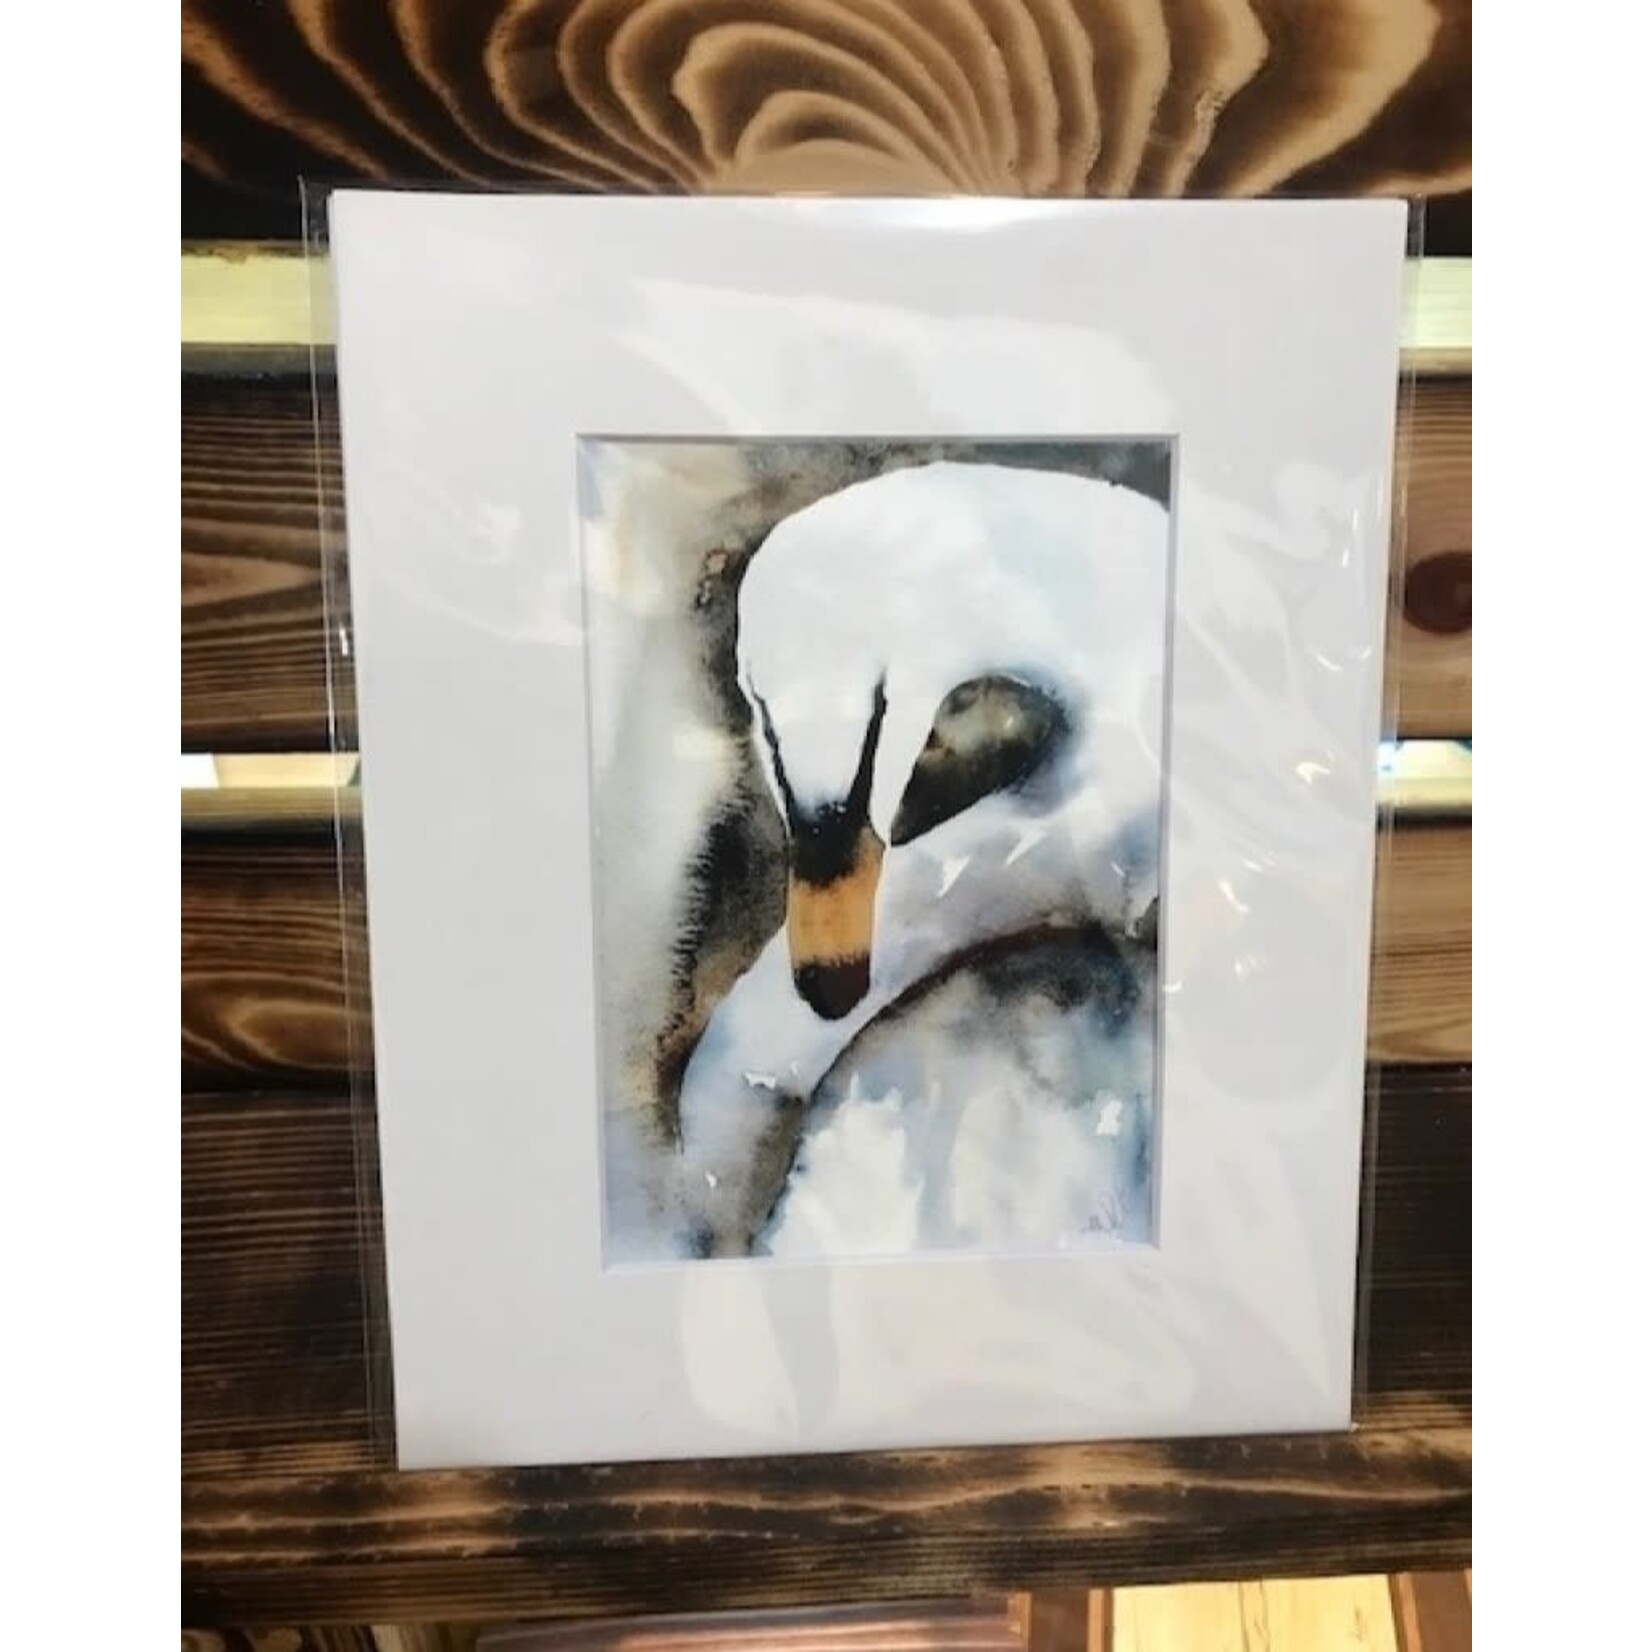 Michelle Detering Limited Matted Print - Swan